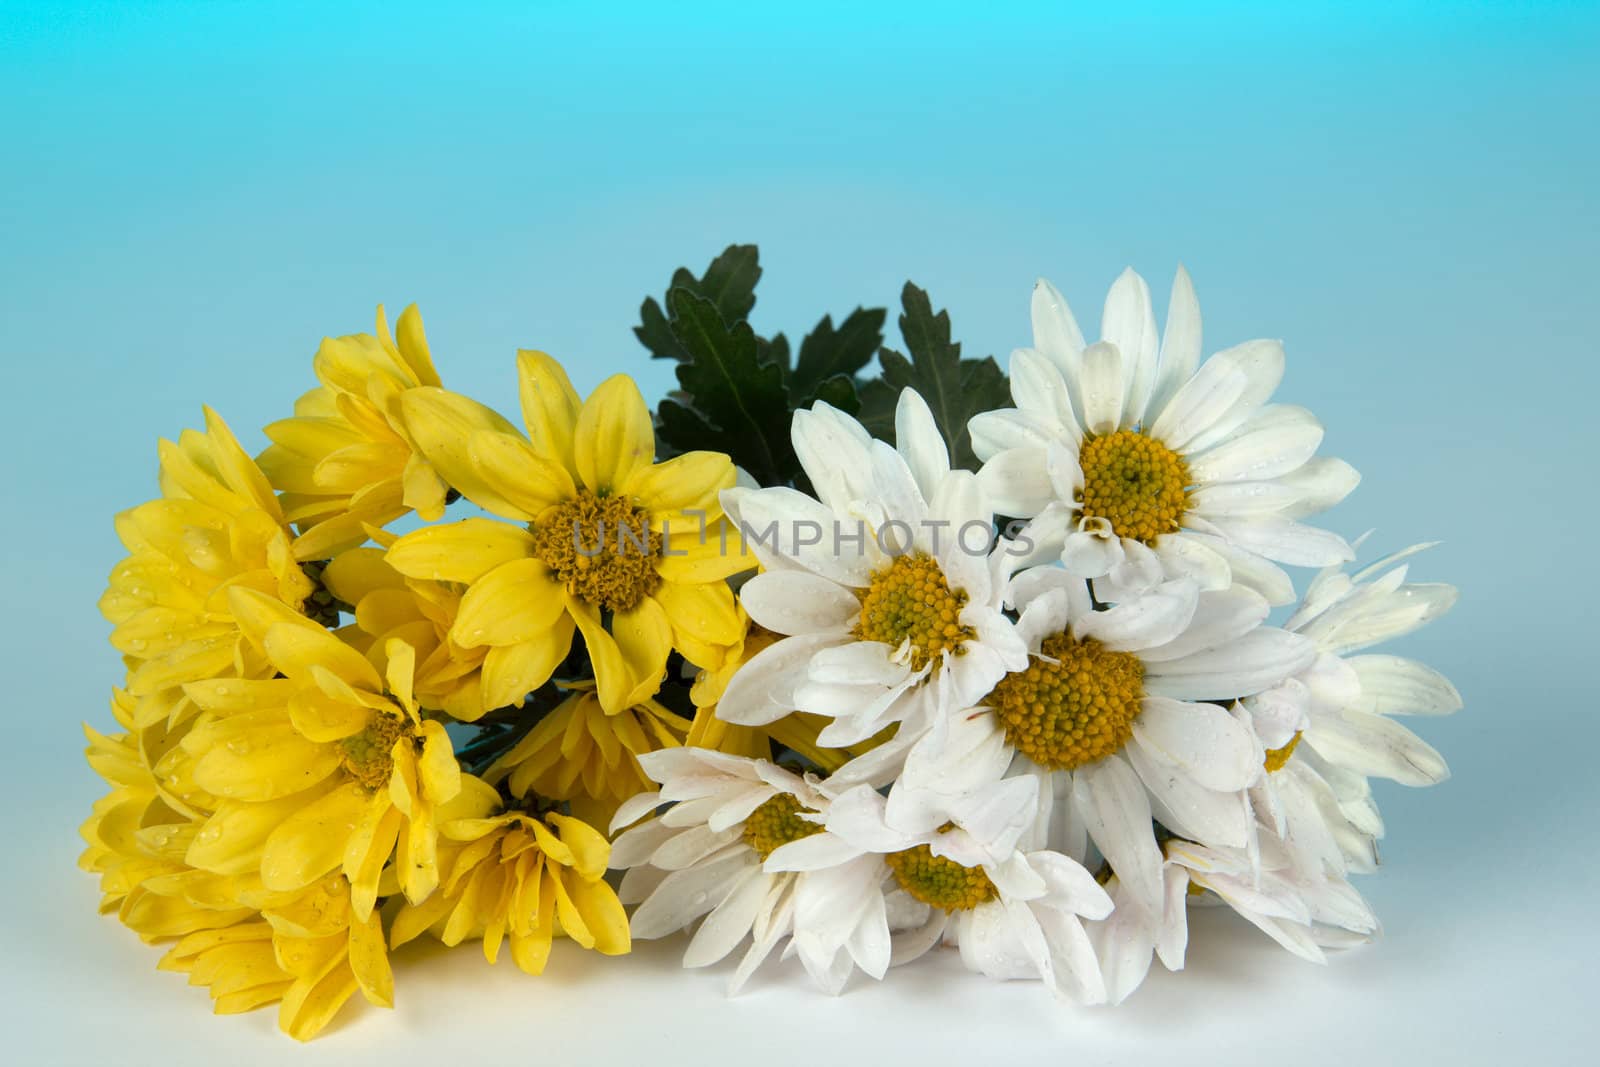 Bouquet of chrysanthemums on a blue background